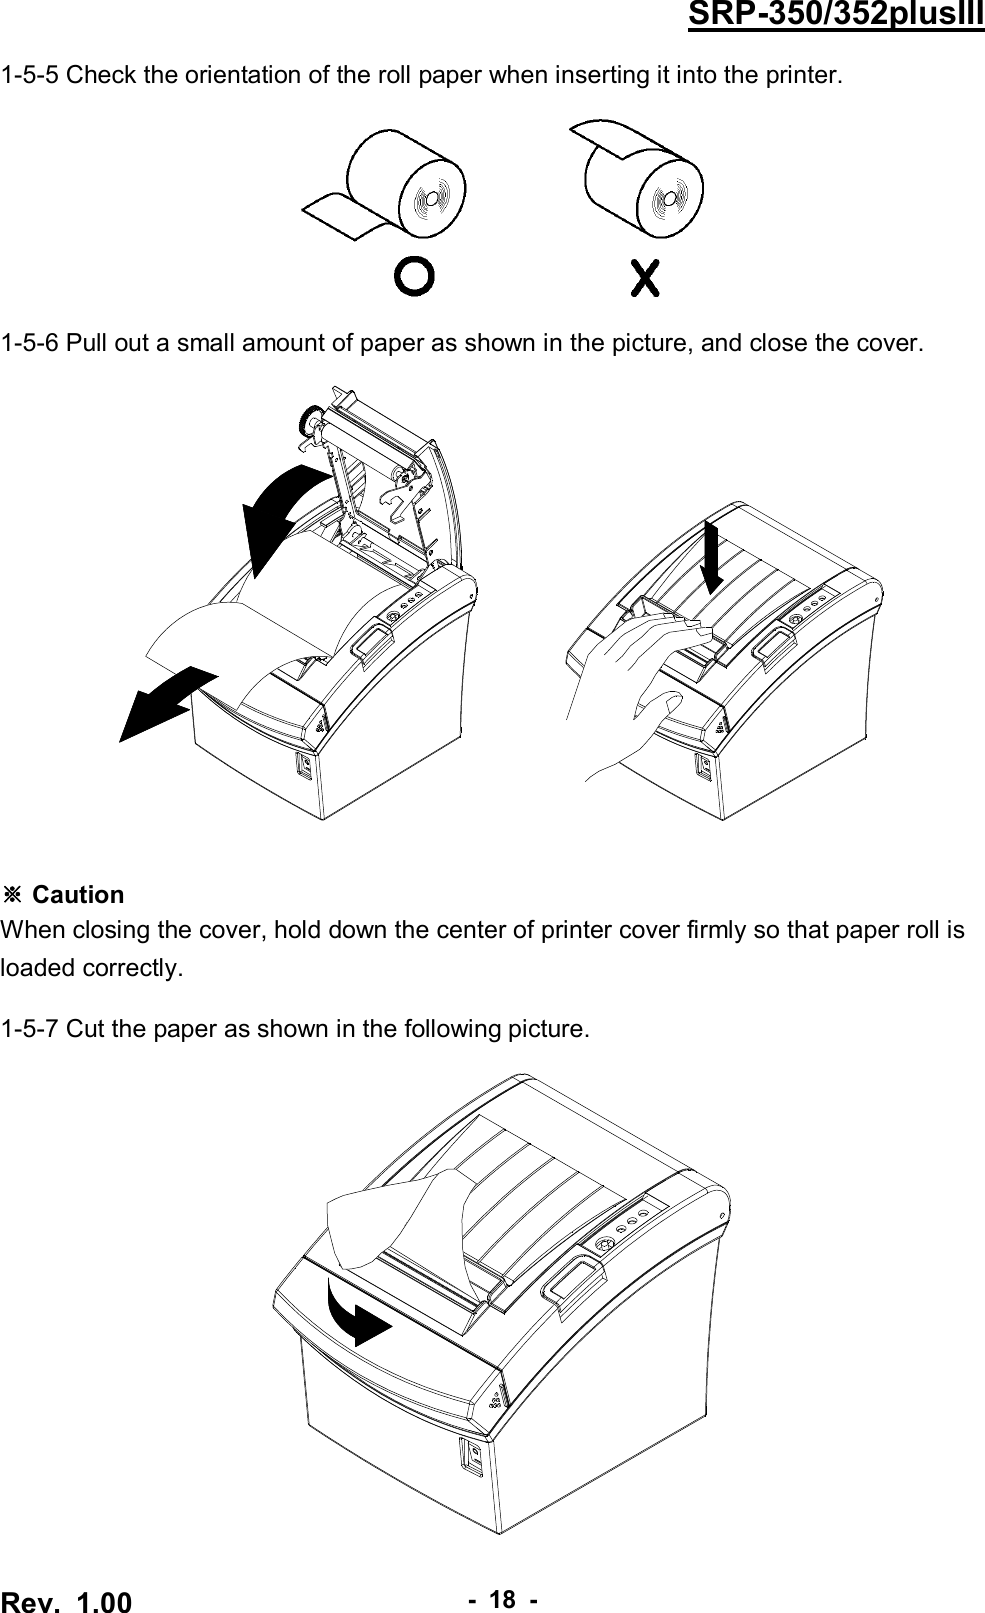  Rev.  1.00 - 18 - SRP-350/352plusIII 1-5-5 Check the orientation of the roll paper when inserting it into the printer.    1-5-6 Pull out a small amount of paper as shown in the picture, and close the cover.             ※ Caution When closing the cover, hold down the center of printer cover firmly so that paper roll is loaded correctly.  1-5-7 Cut the paper as shown in the following picture.   